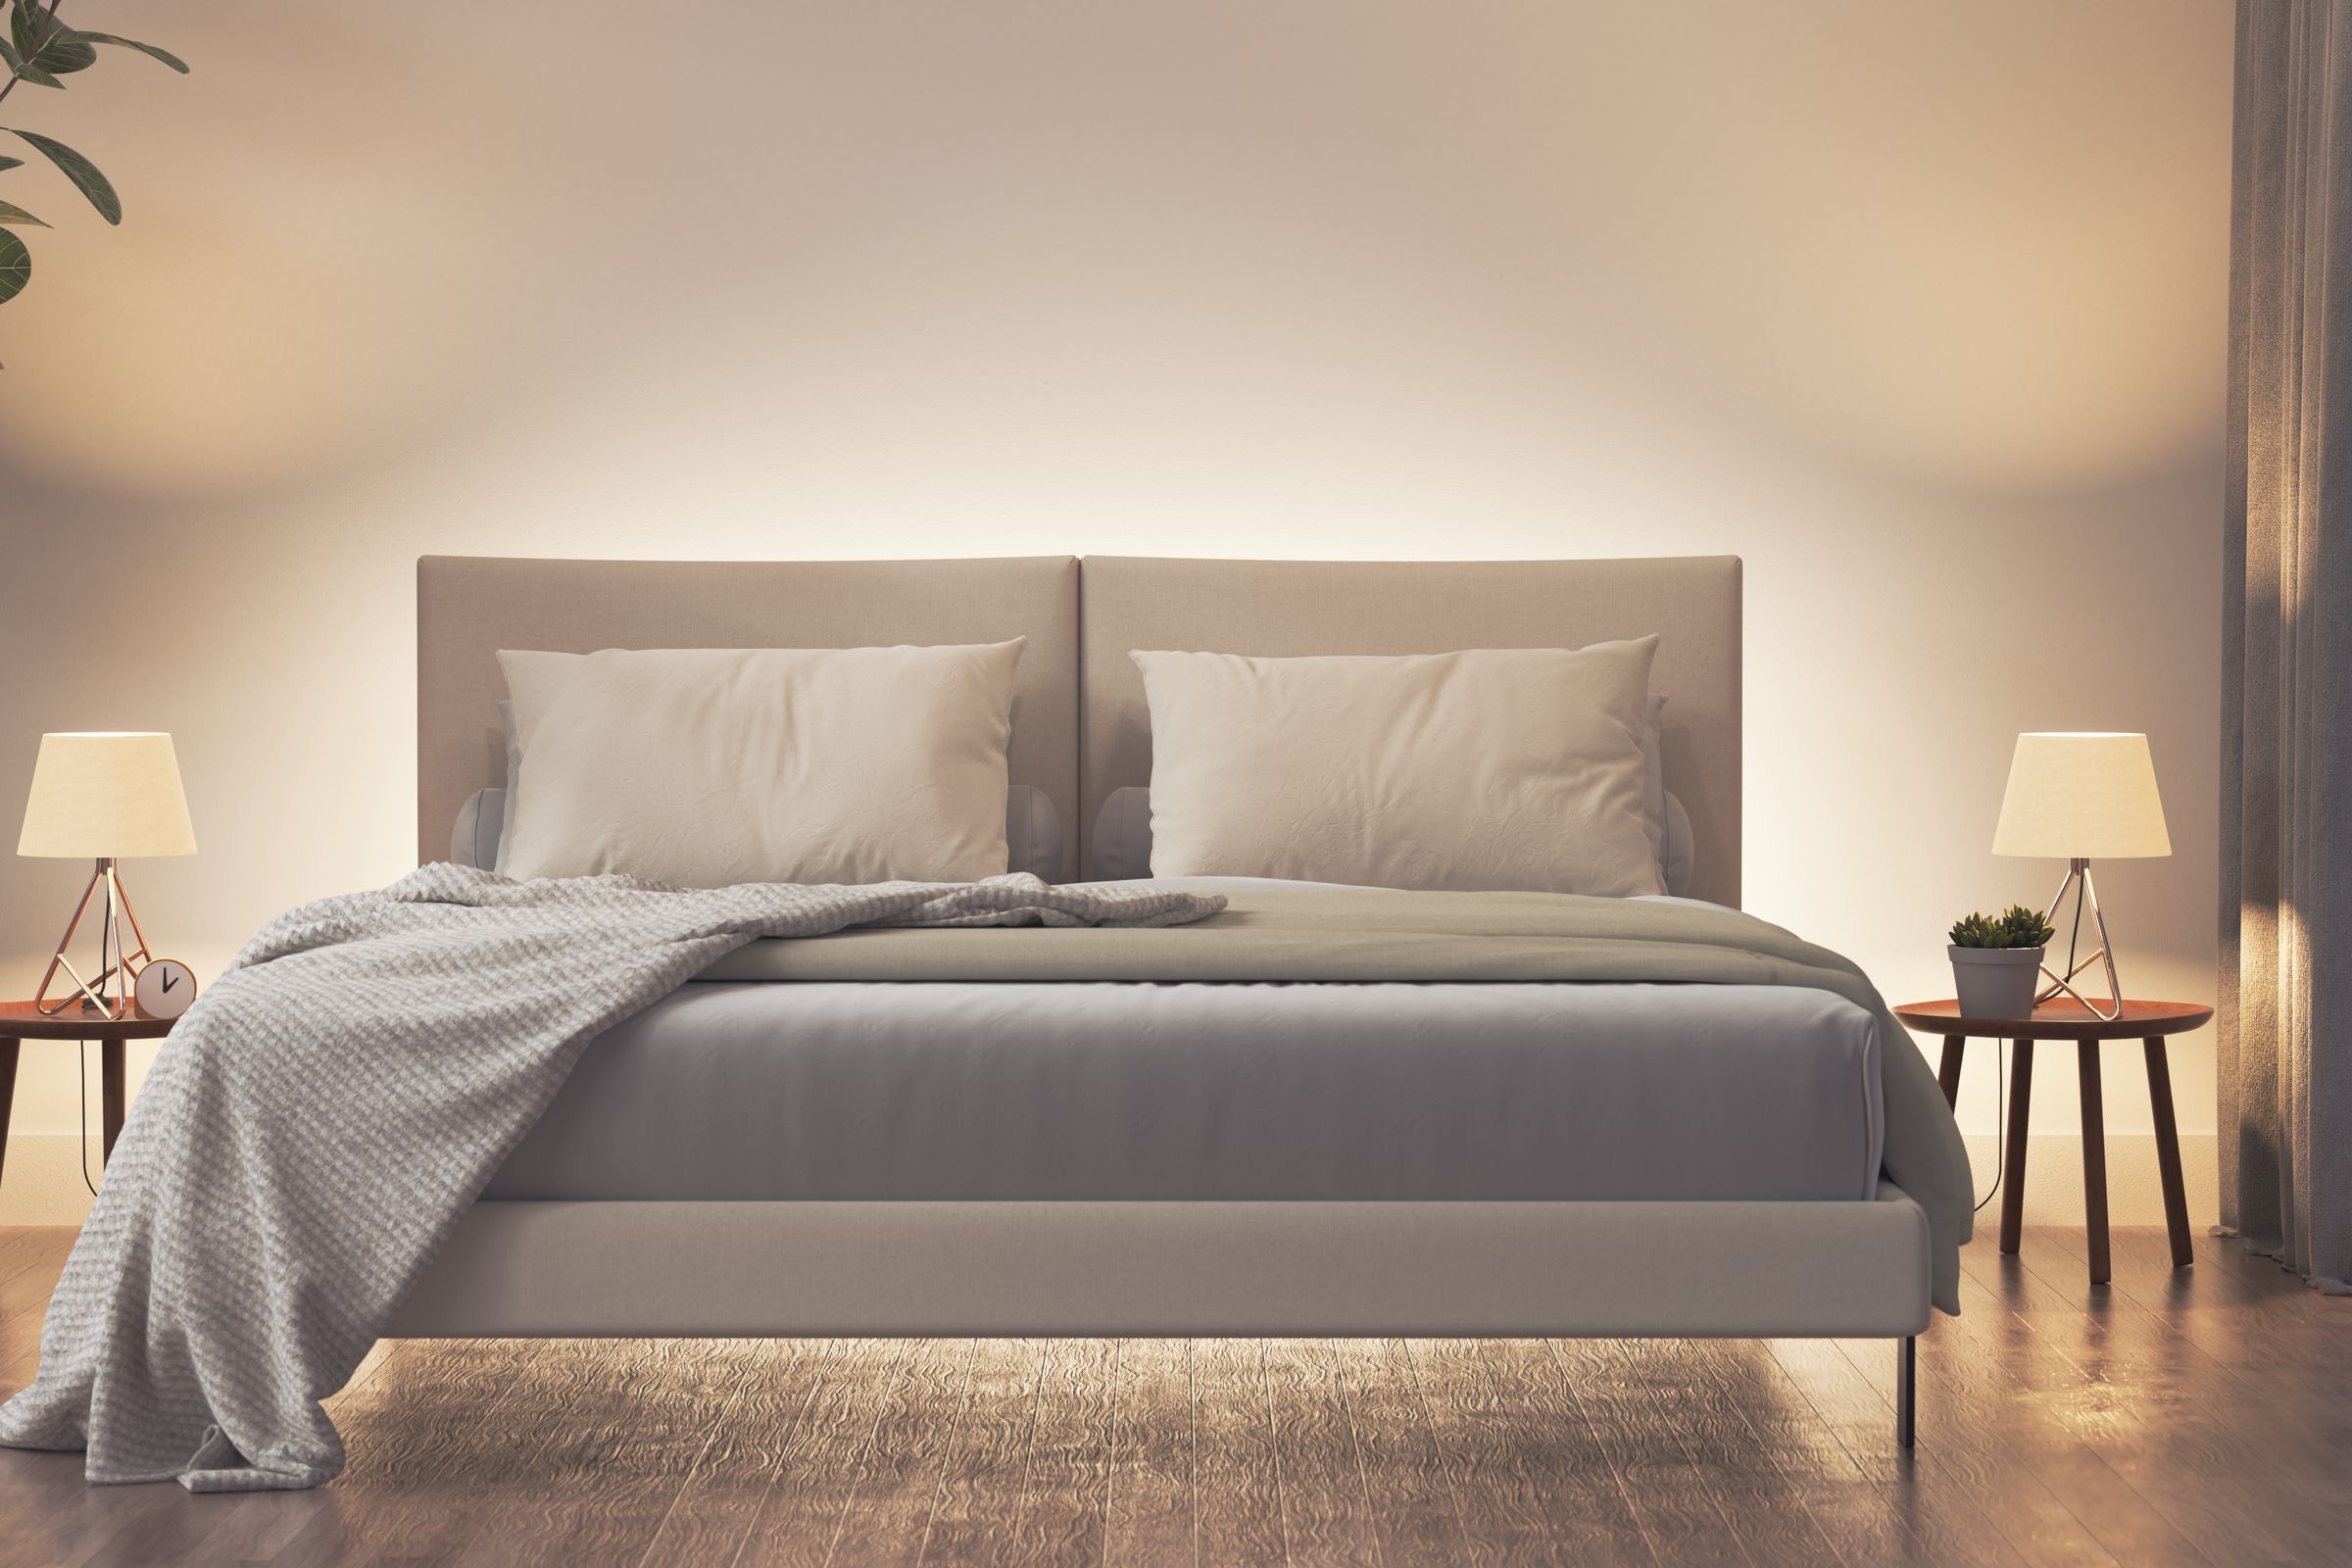 A bed with two lights on either side casting a gentle glow.